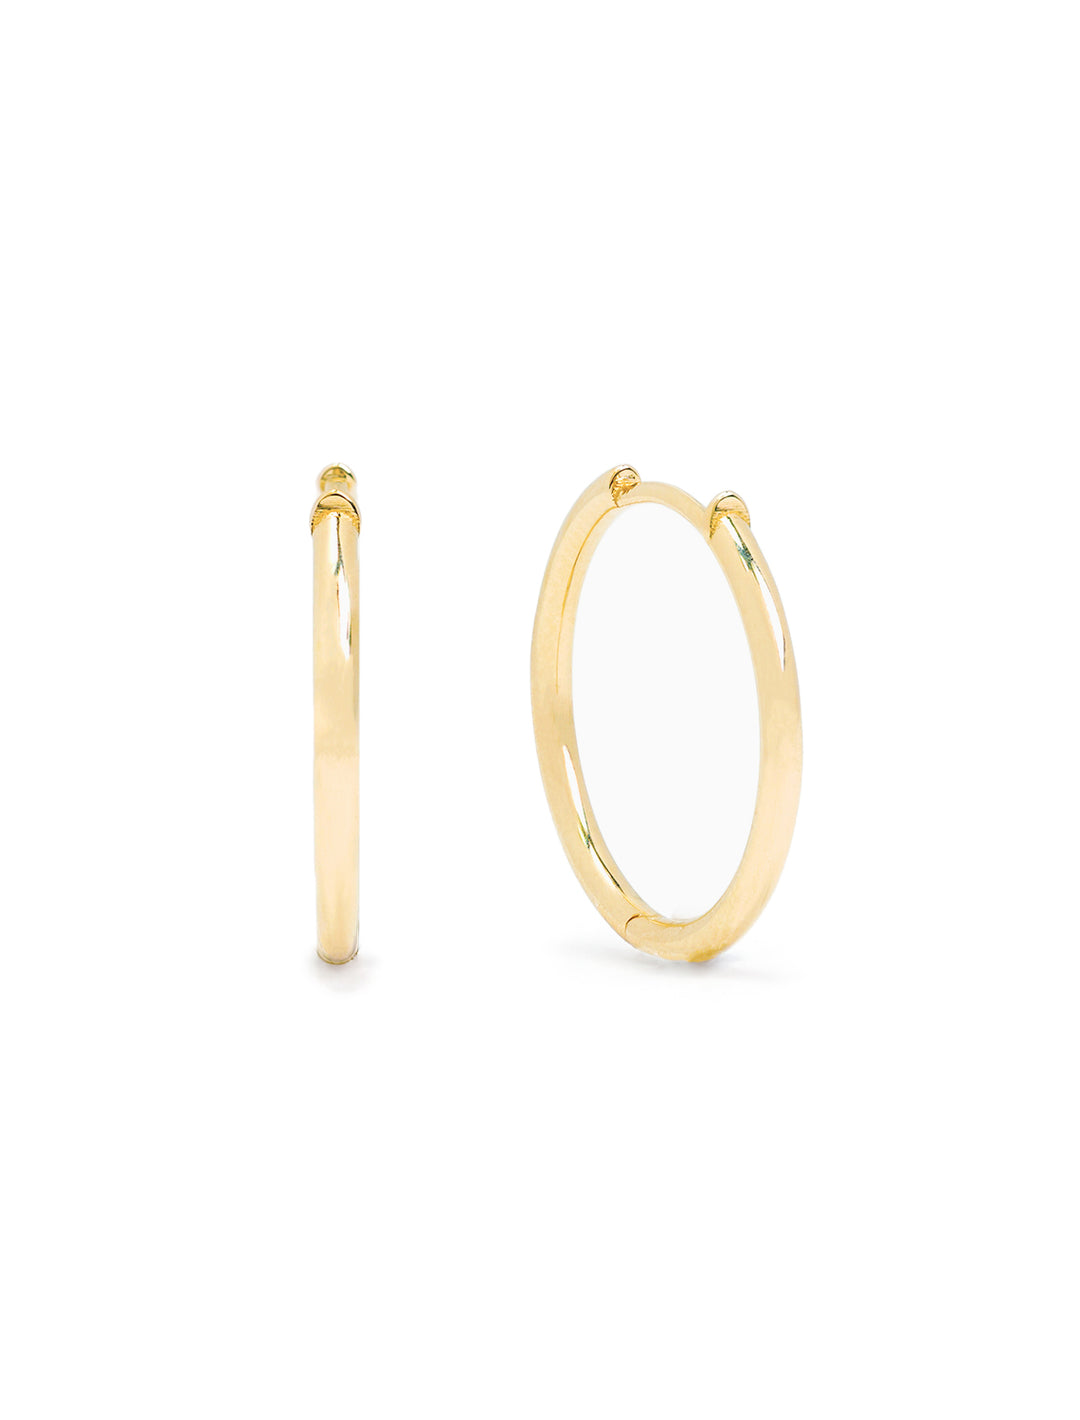 Front view of Zoe Chicco's 14k large hinged huggie hoops.